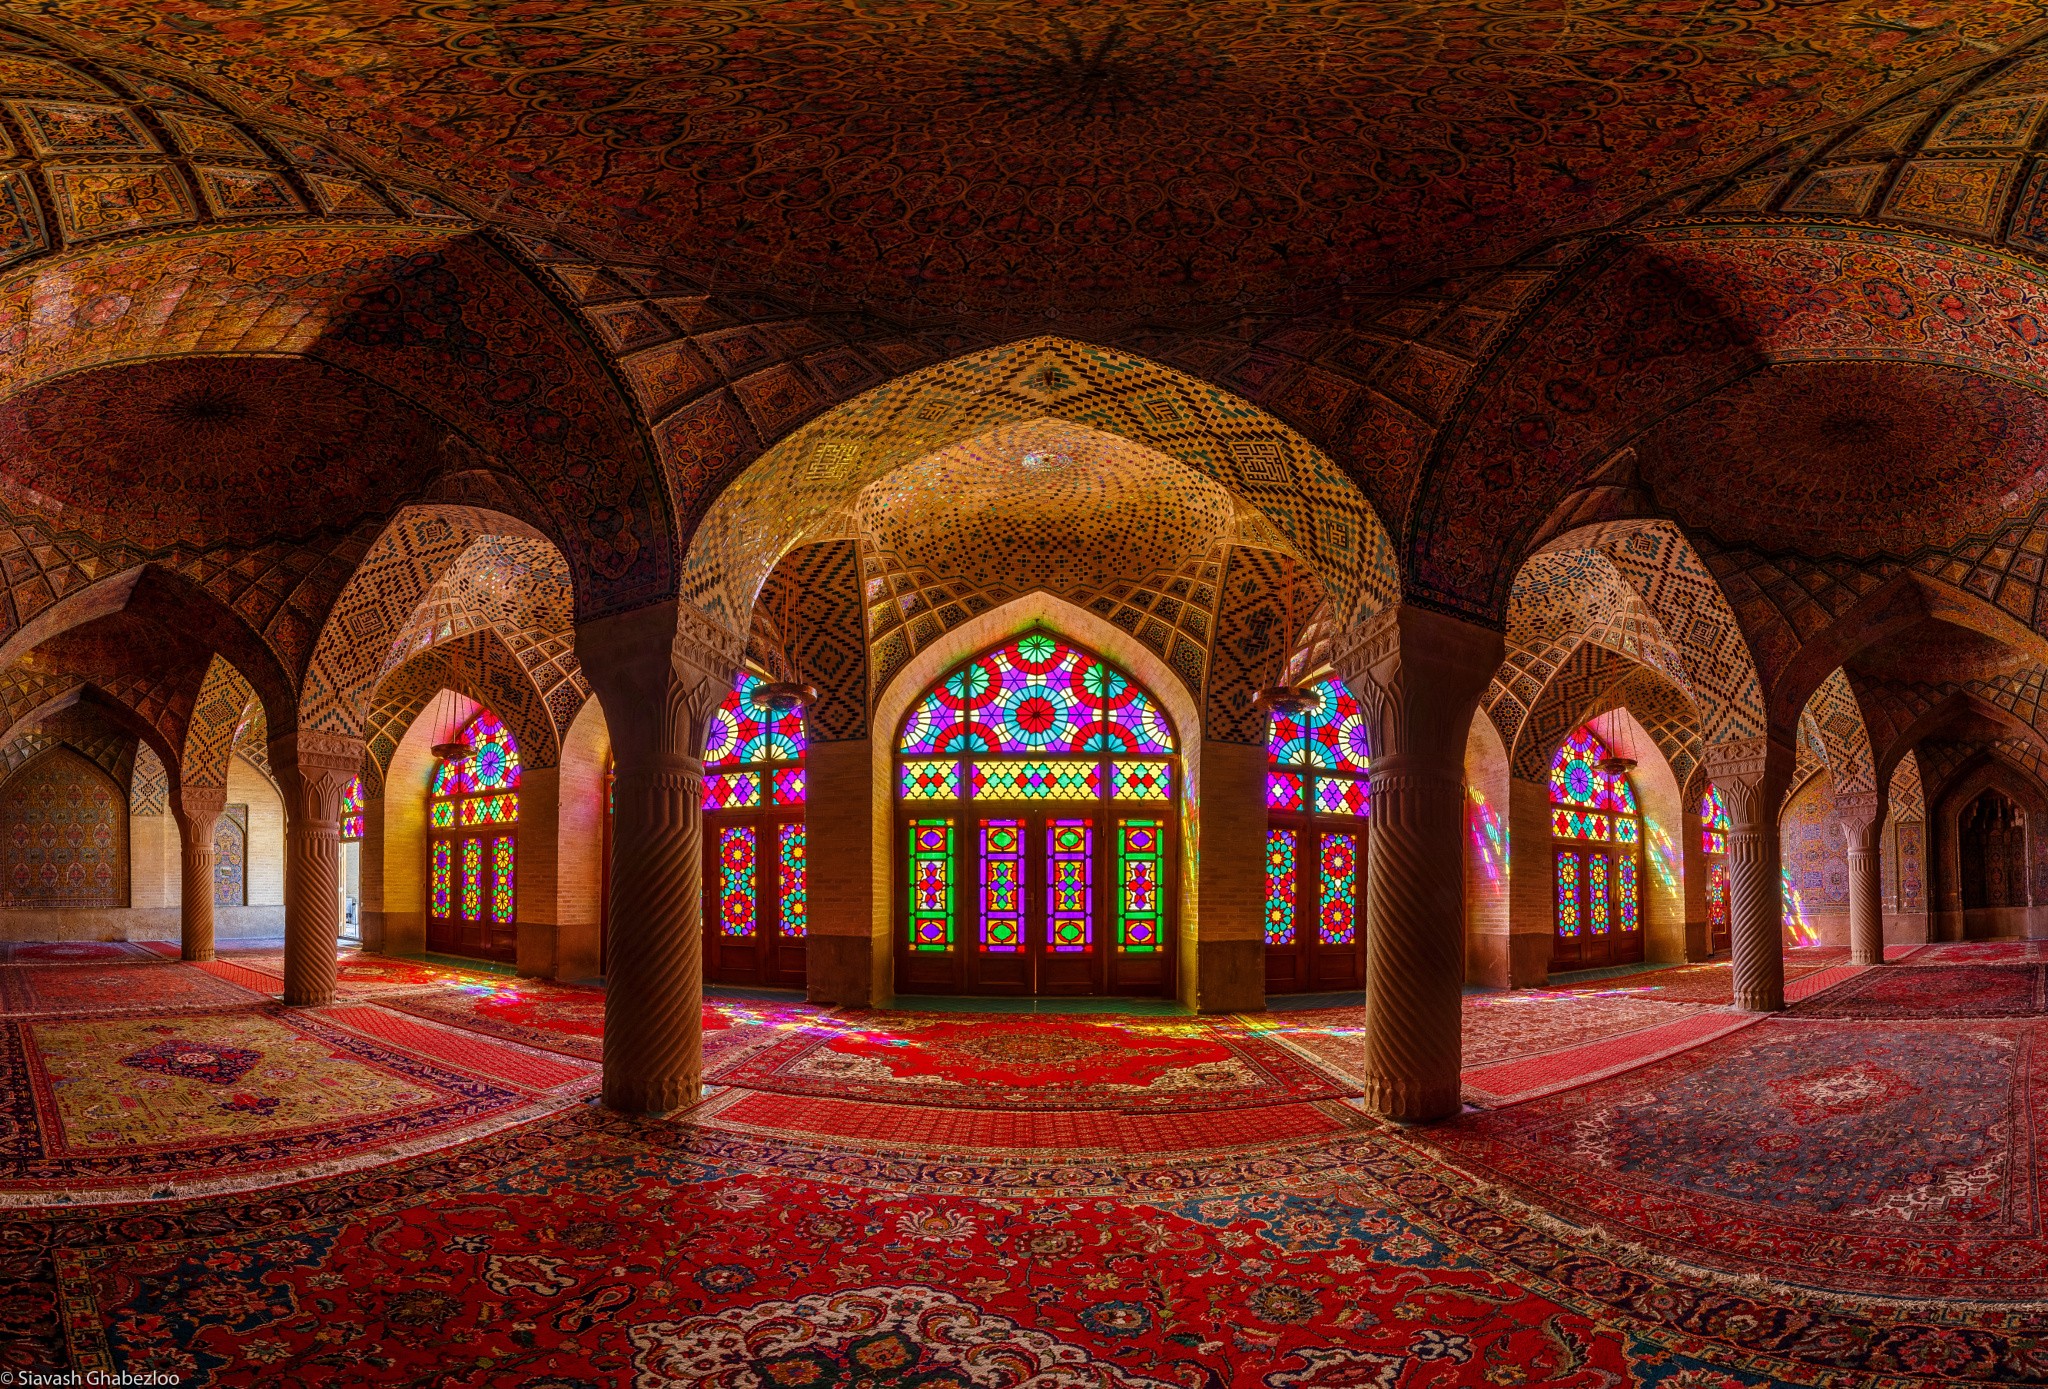 iran, mosque, stained glass, religious, arch, colorful, colors, mosques